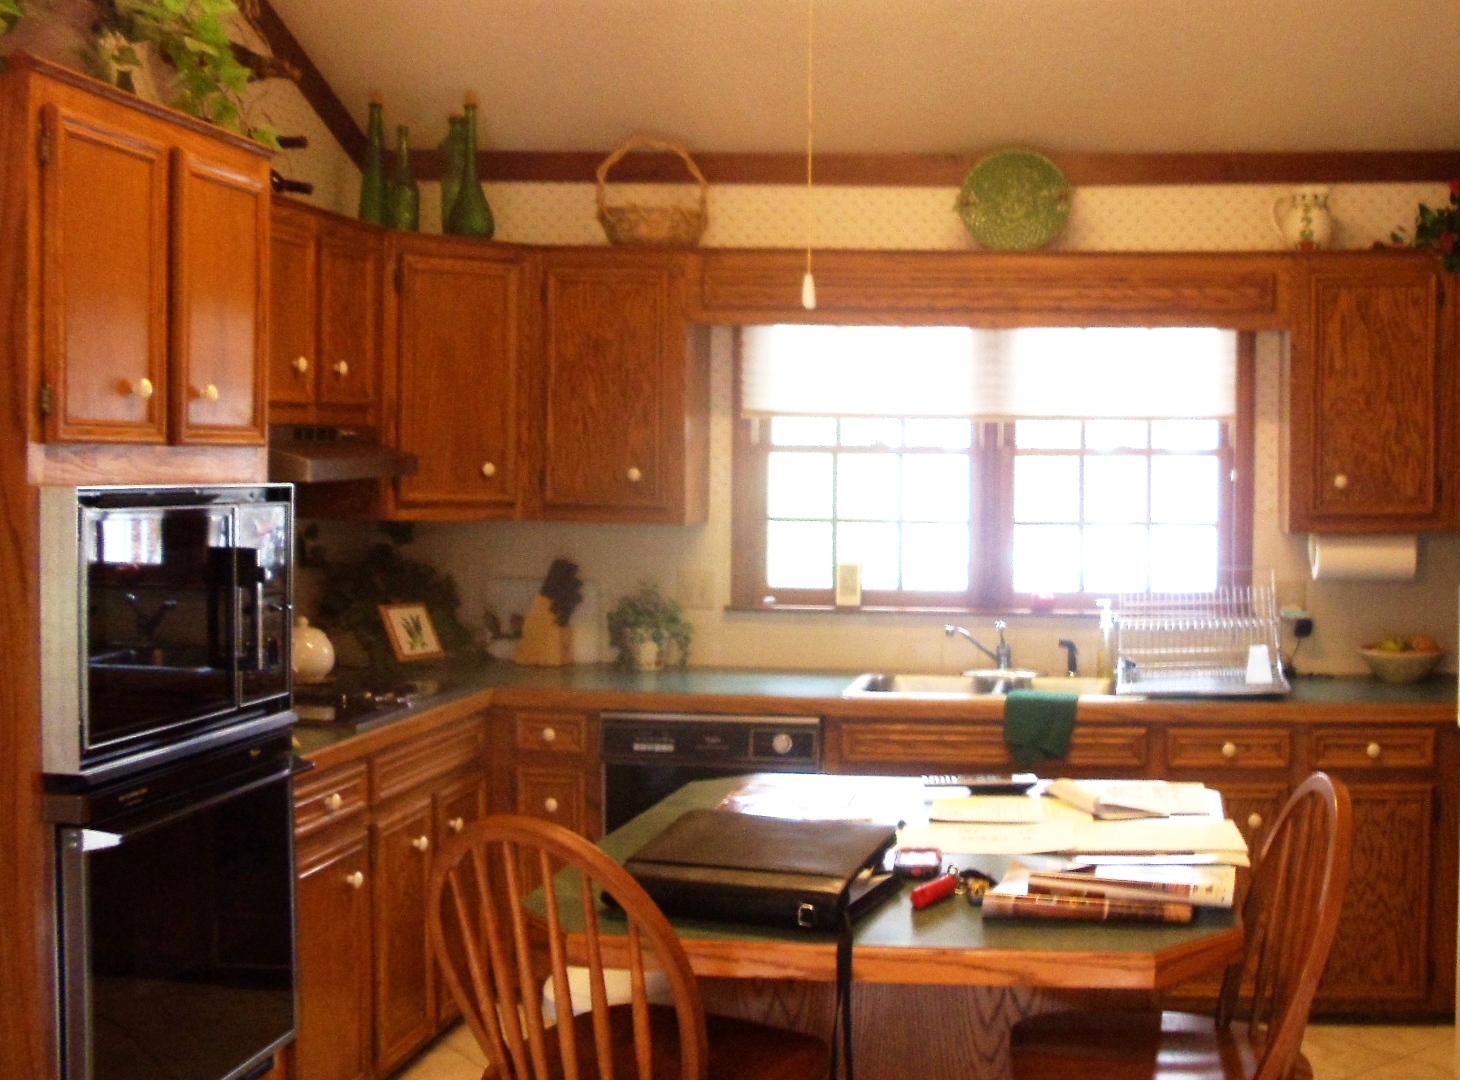 How To Update A Kitchen On A Budget 6 Tips And Photos For